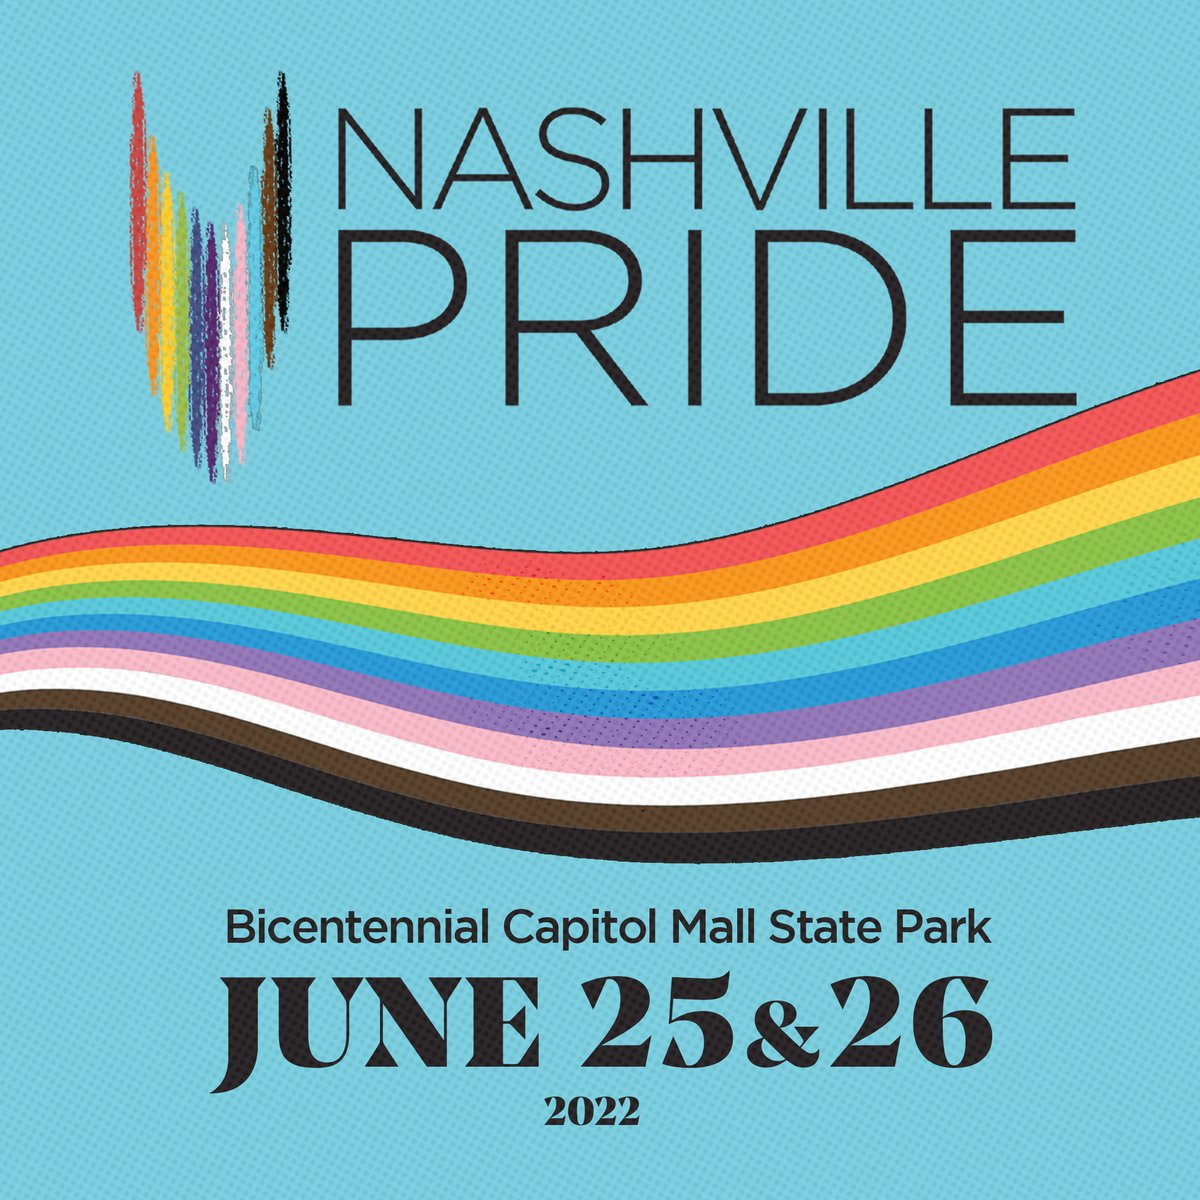 Mark your calendars for next year's Nashville Pride Festival! Happening June 25-26, 2022 at Bicentennial Capitol Mall State Park! 🏳️‍🌈 hubs.li/H0-T6RH0